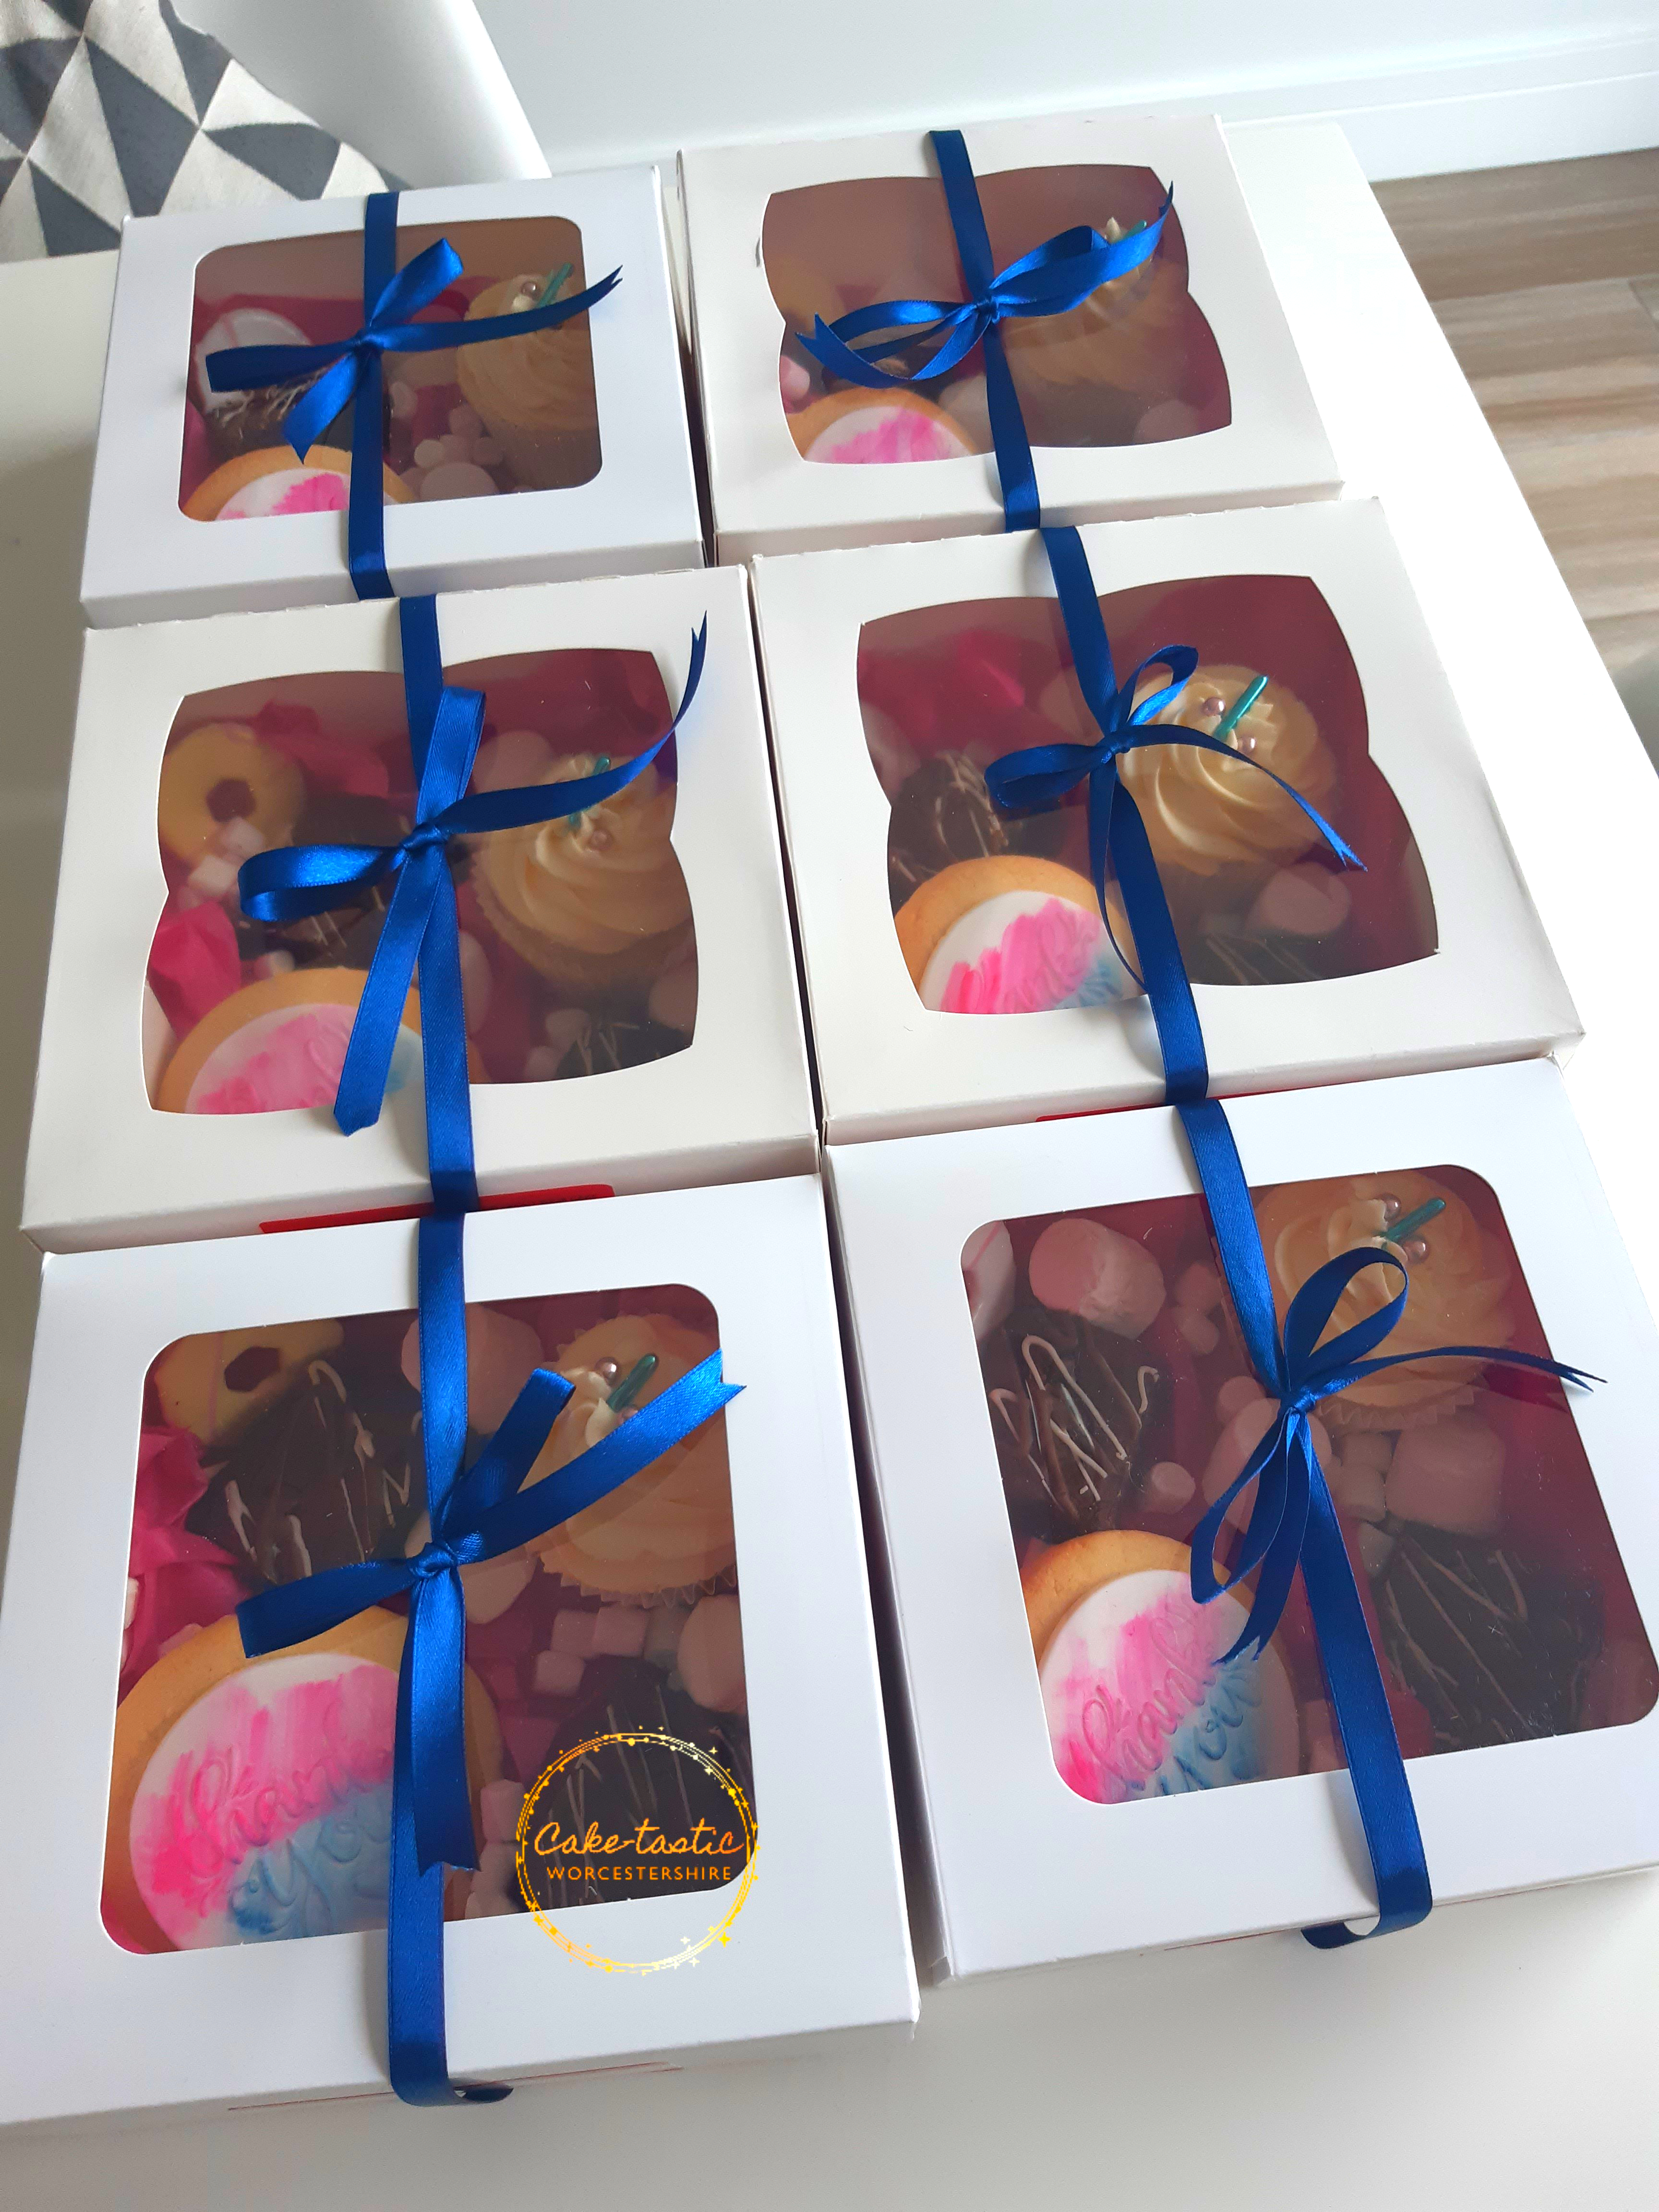 Corporate Treat Boxes